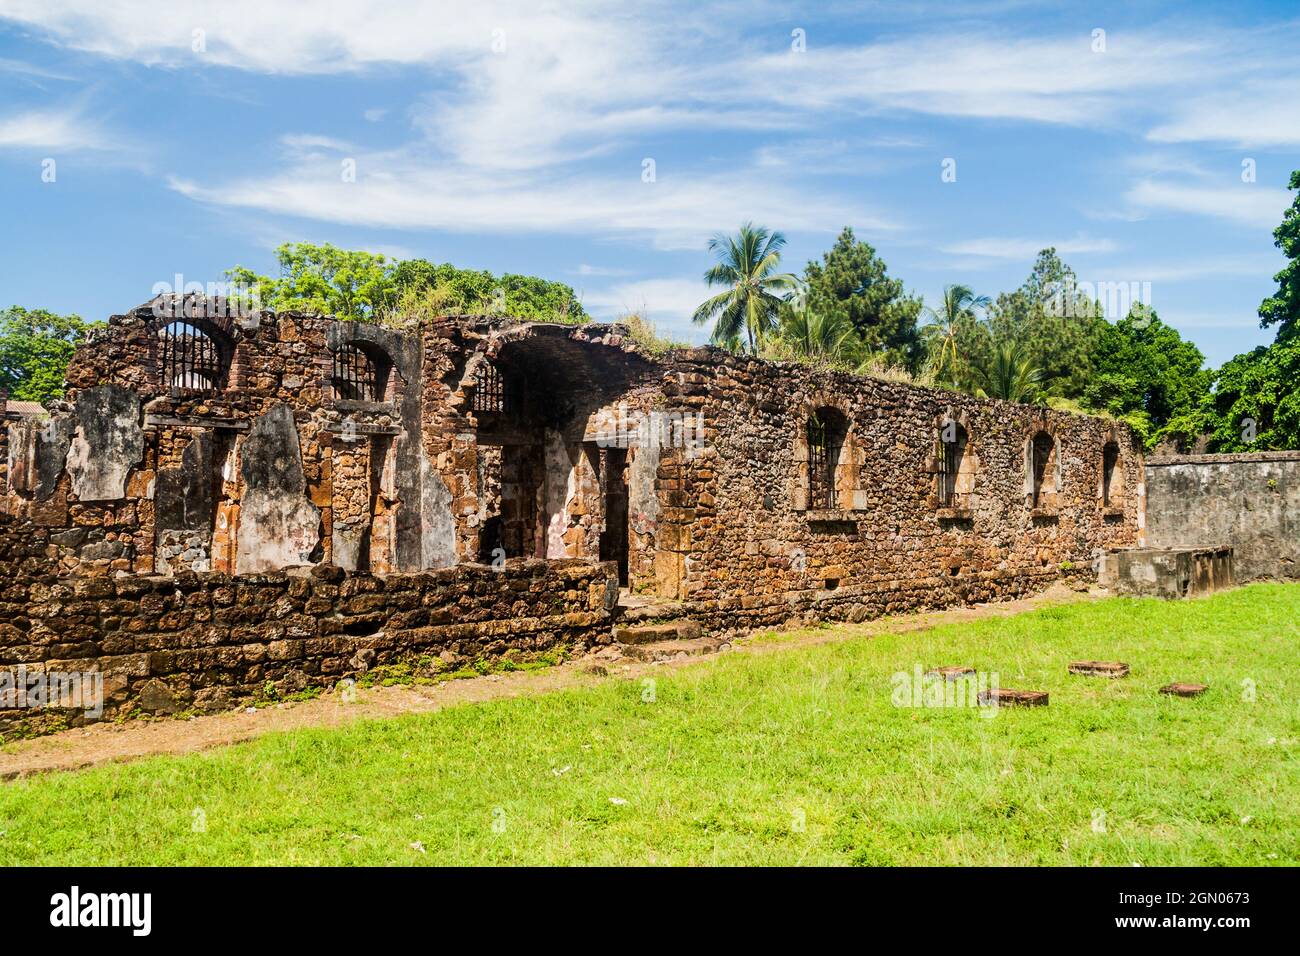 Ruins of former penal colony at Ile Royale, one of the islands of Iles du Salut (Islands of Salvation) in French Guiana Stock Photo